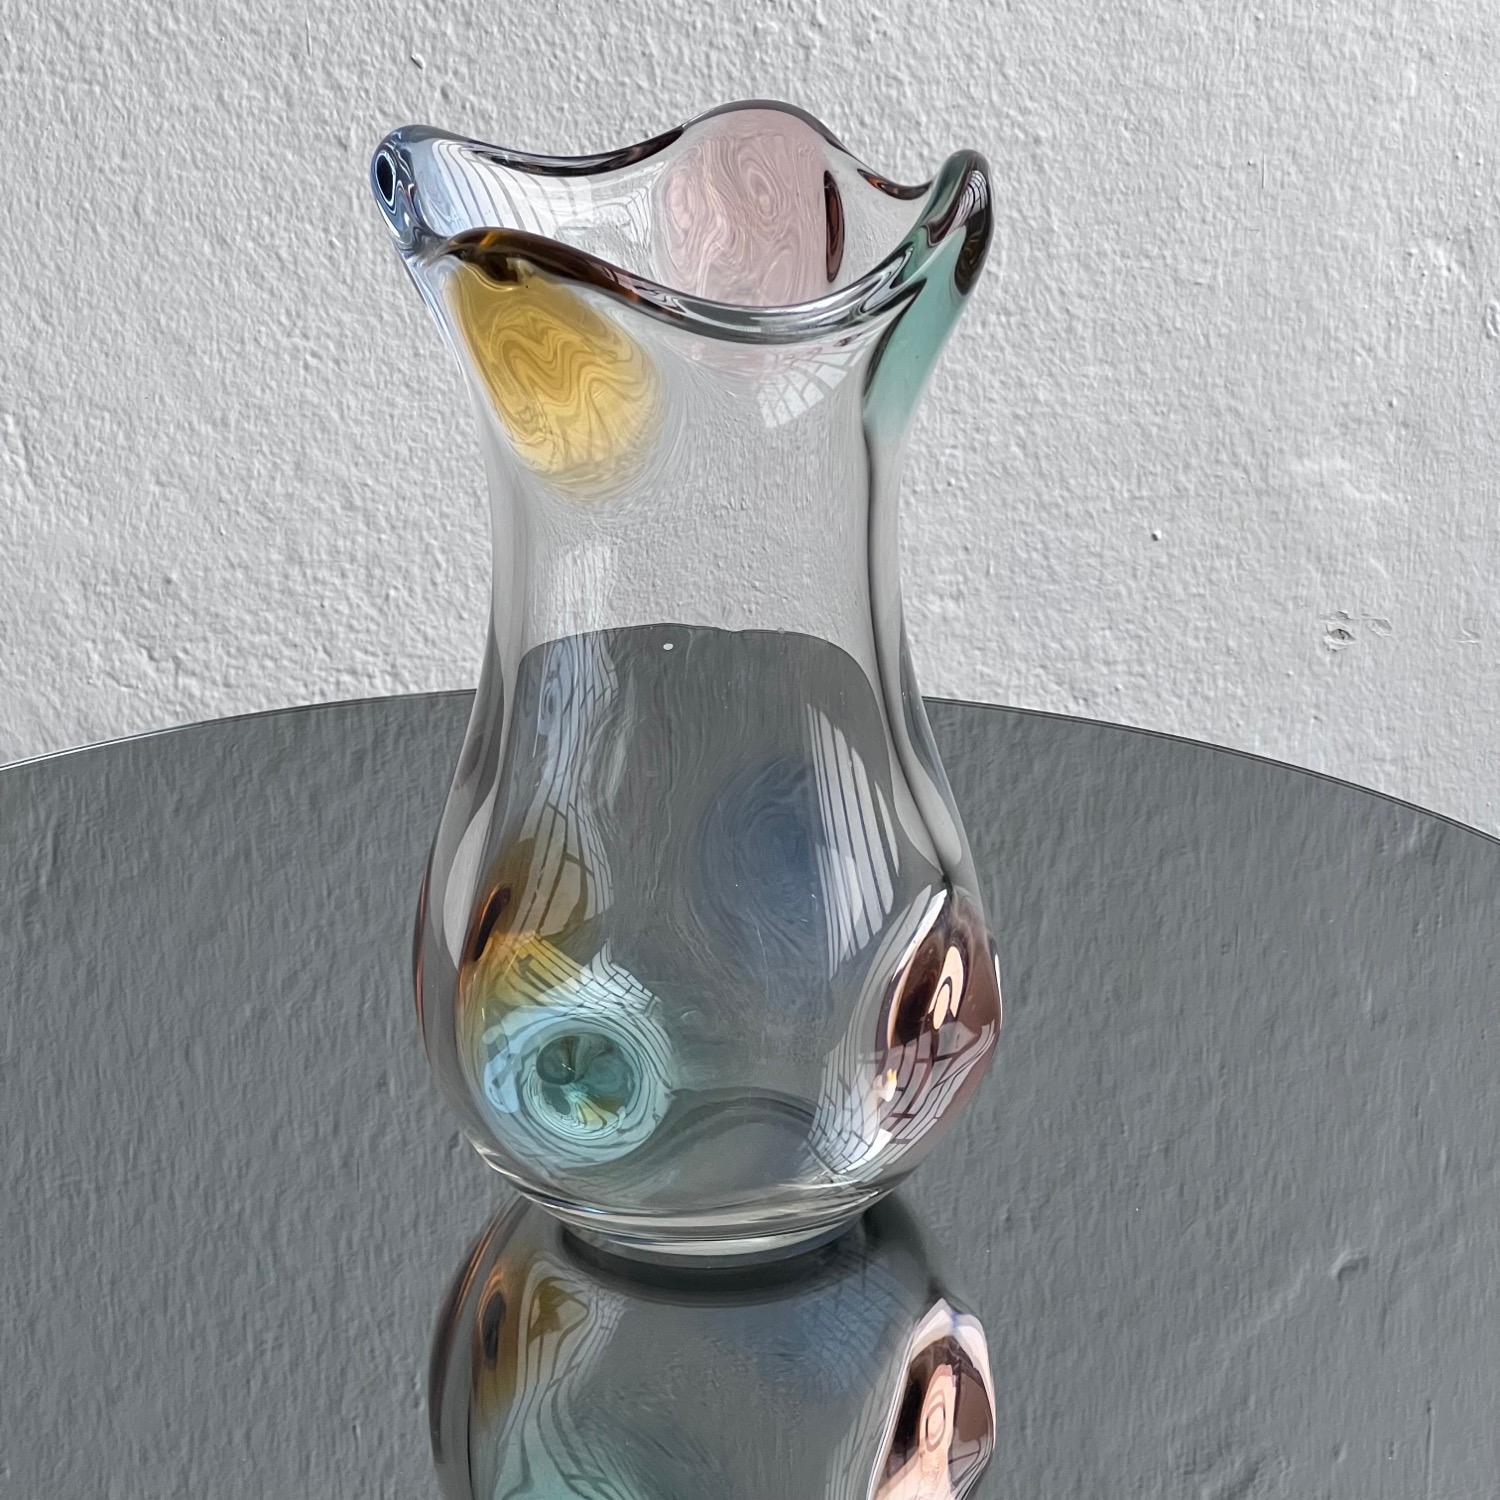 Coming from Spinzi Milano's curated selection of vintage collectible glass, this big vase from the 1960s is a wonderful example of Italian design.

Fluid, elegant and colorful, almost sculptural in its beauty, its made in the Murano technique of